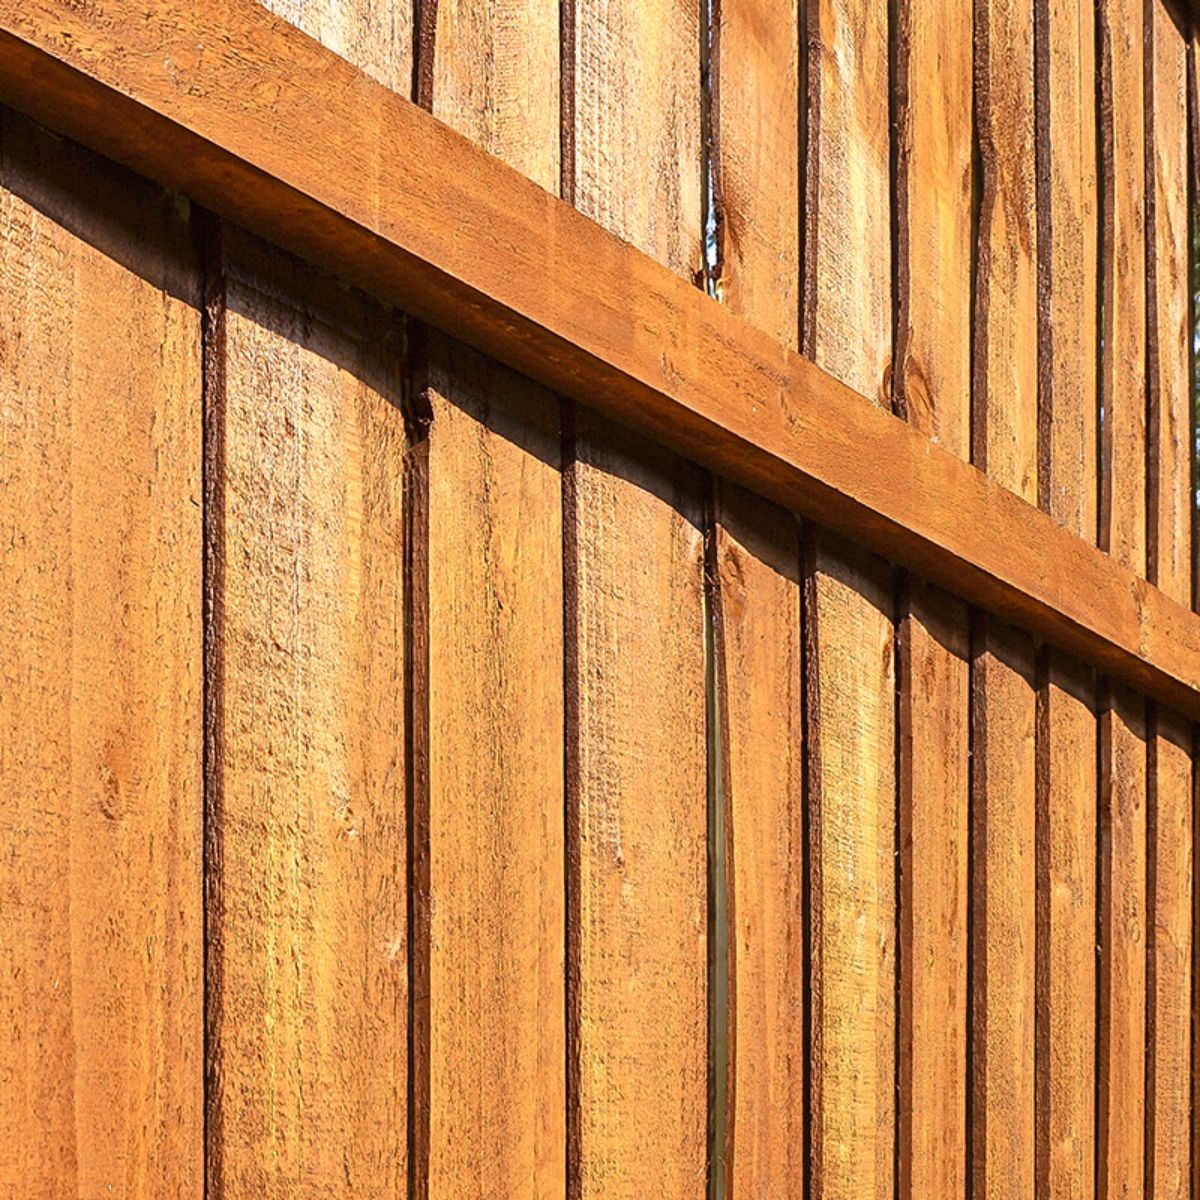 Fence Boards